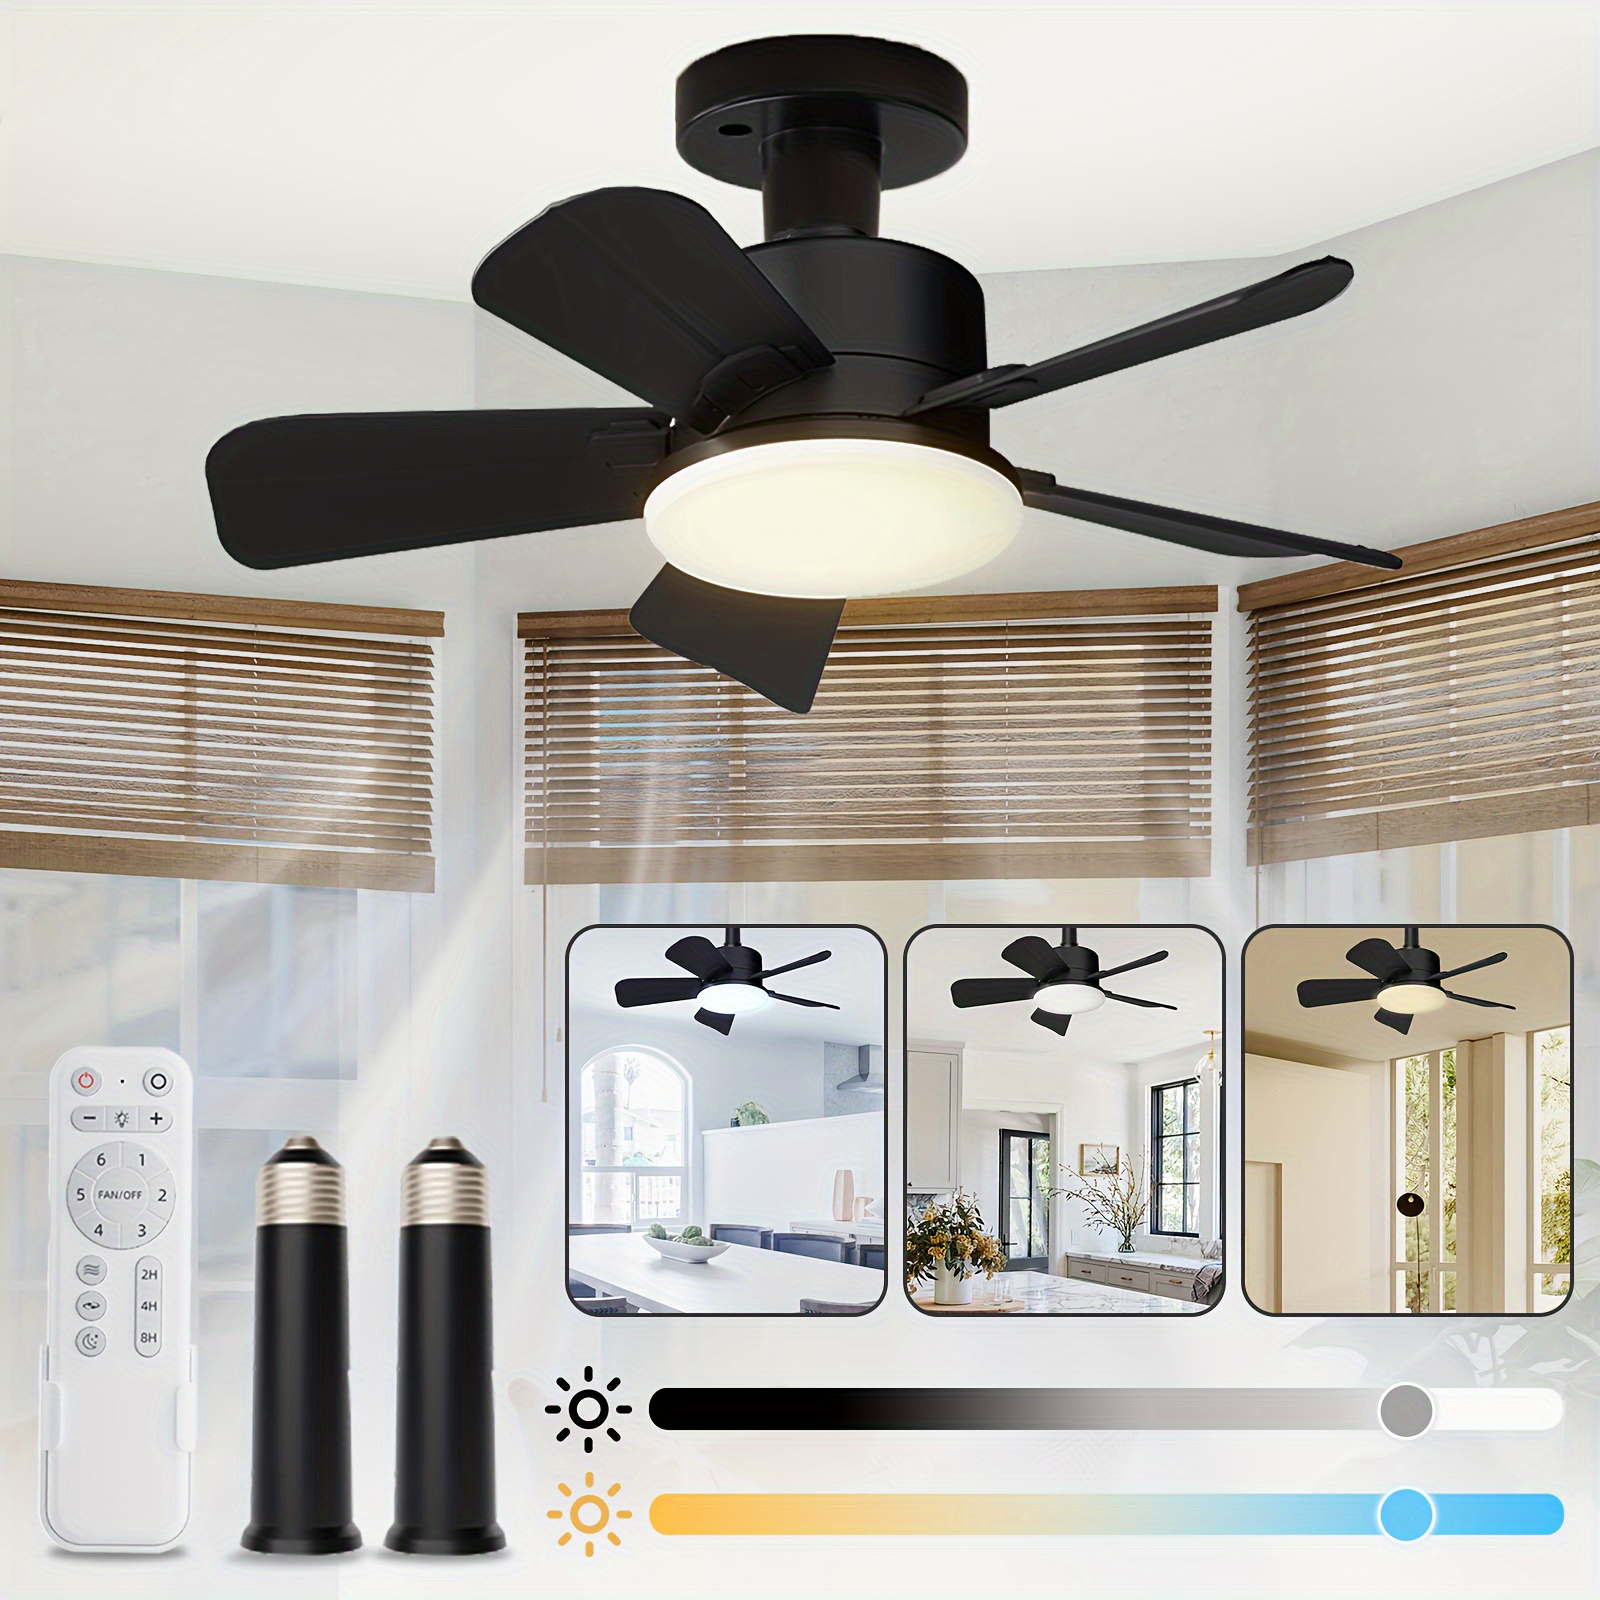 

17" Socket Fan Light With Remote And 2 Socket Extenders, Small Ceiling Fan With Light For Bedroom, Kitchen, Living Room, 6-speeds, 3 Colors 3000k-6500k, 1200lm